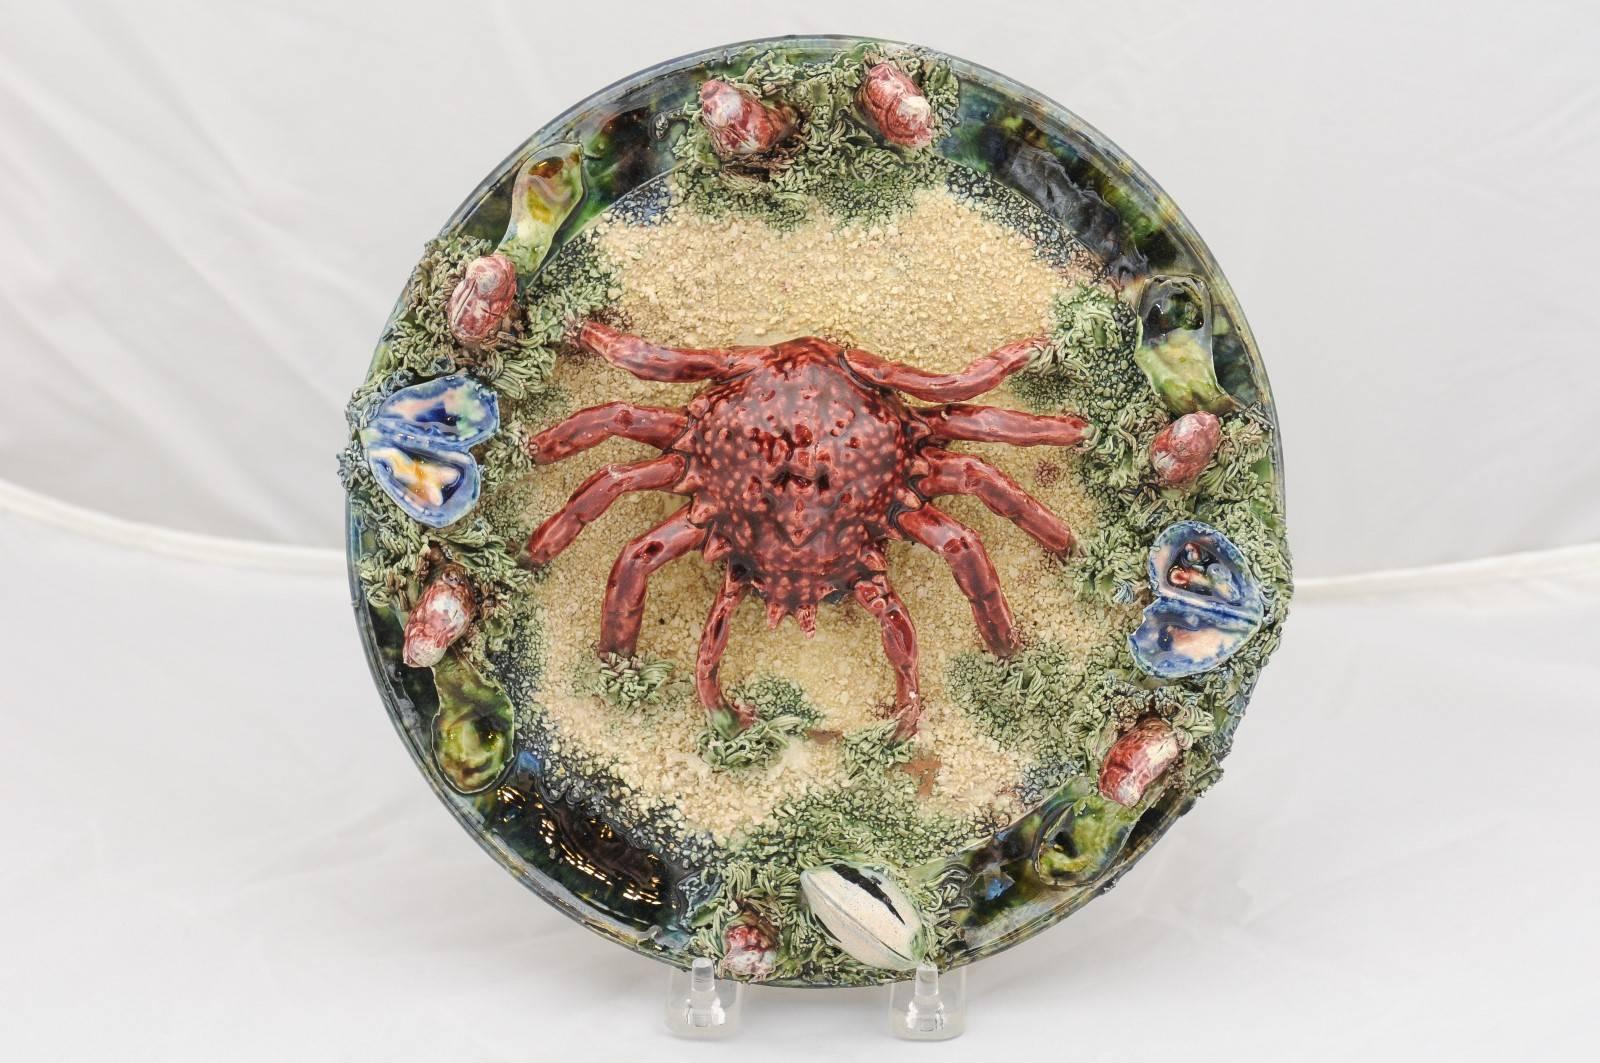 A glazed majolica small size plate in the Palissy manner from the early 20th century. This colorful decorative plate was made in the 1920s by an artist who was highly inspired by French Renaissance craftsman Bernard Palissy whose work can be seen in